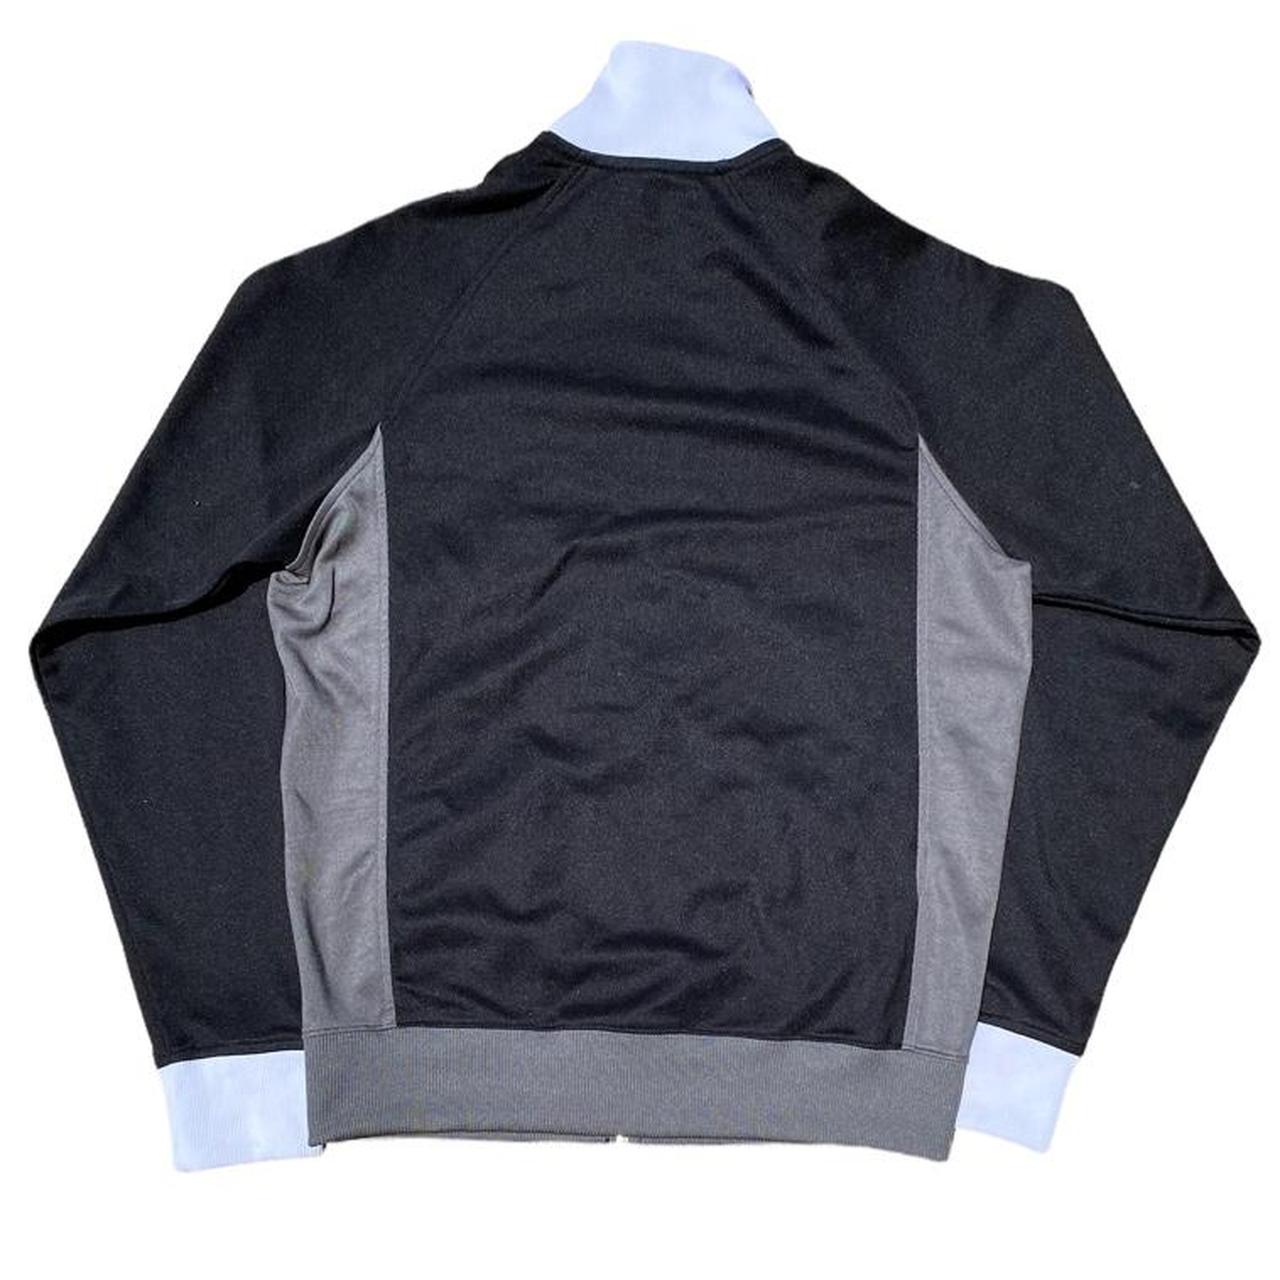 Product Image 2 - Vintage Fred Perry Jacket 

Size: